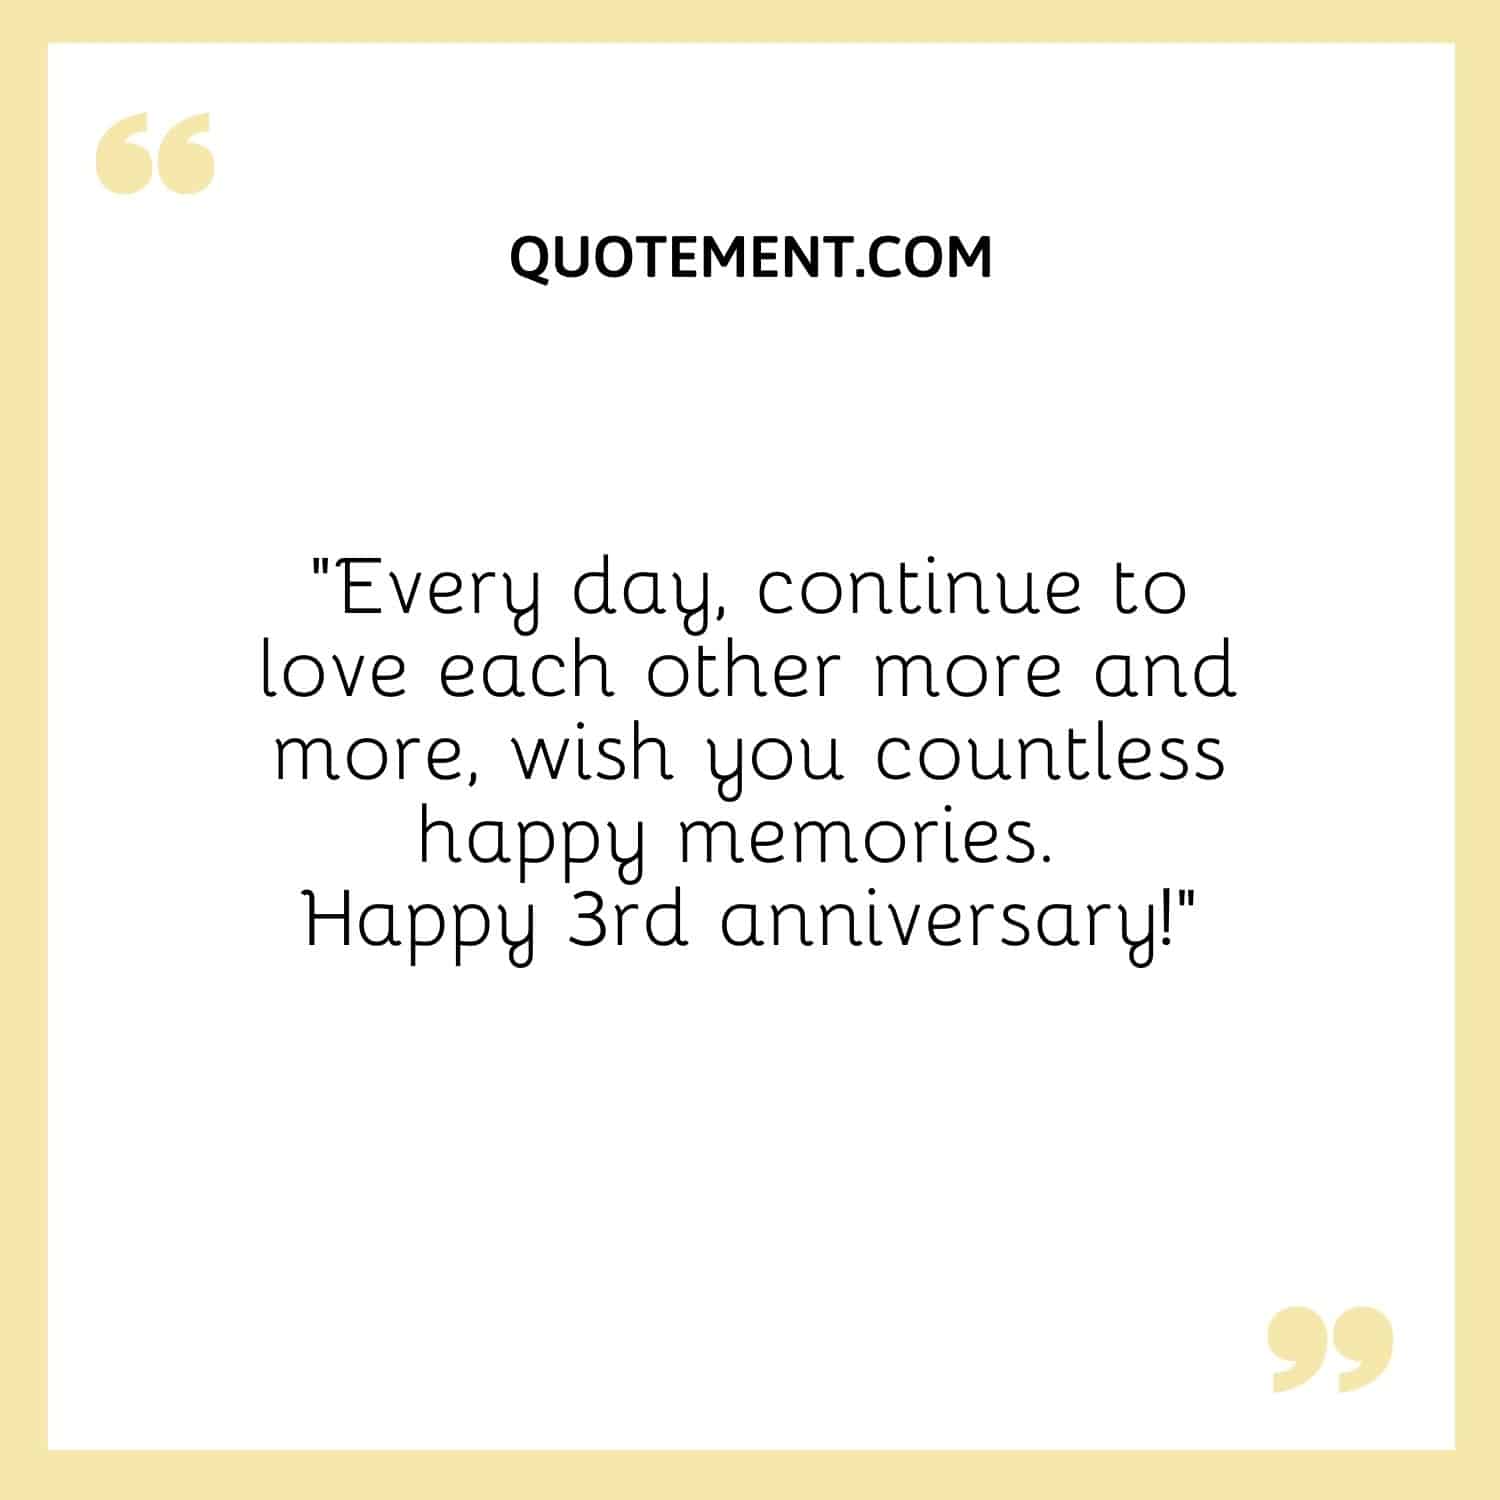 “Every day, continue to love each other more and more, wish you countless happy memories. Happy 3rd anniversary!”